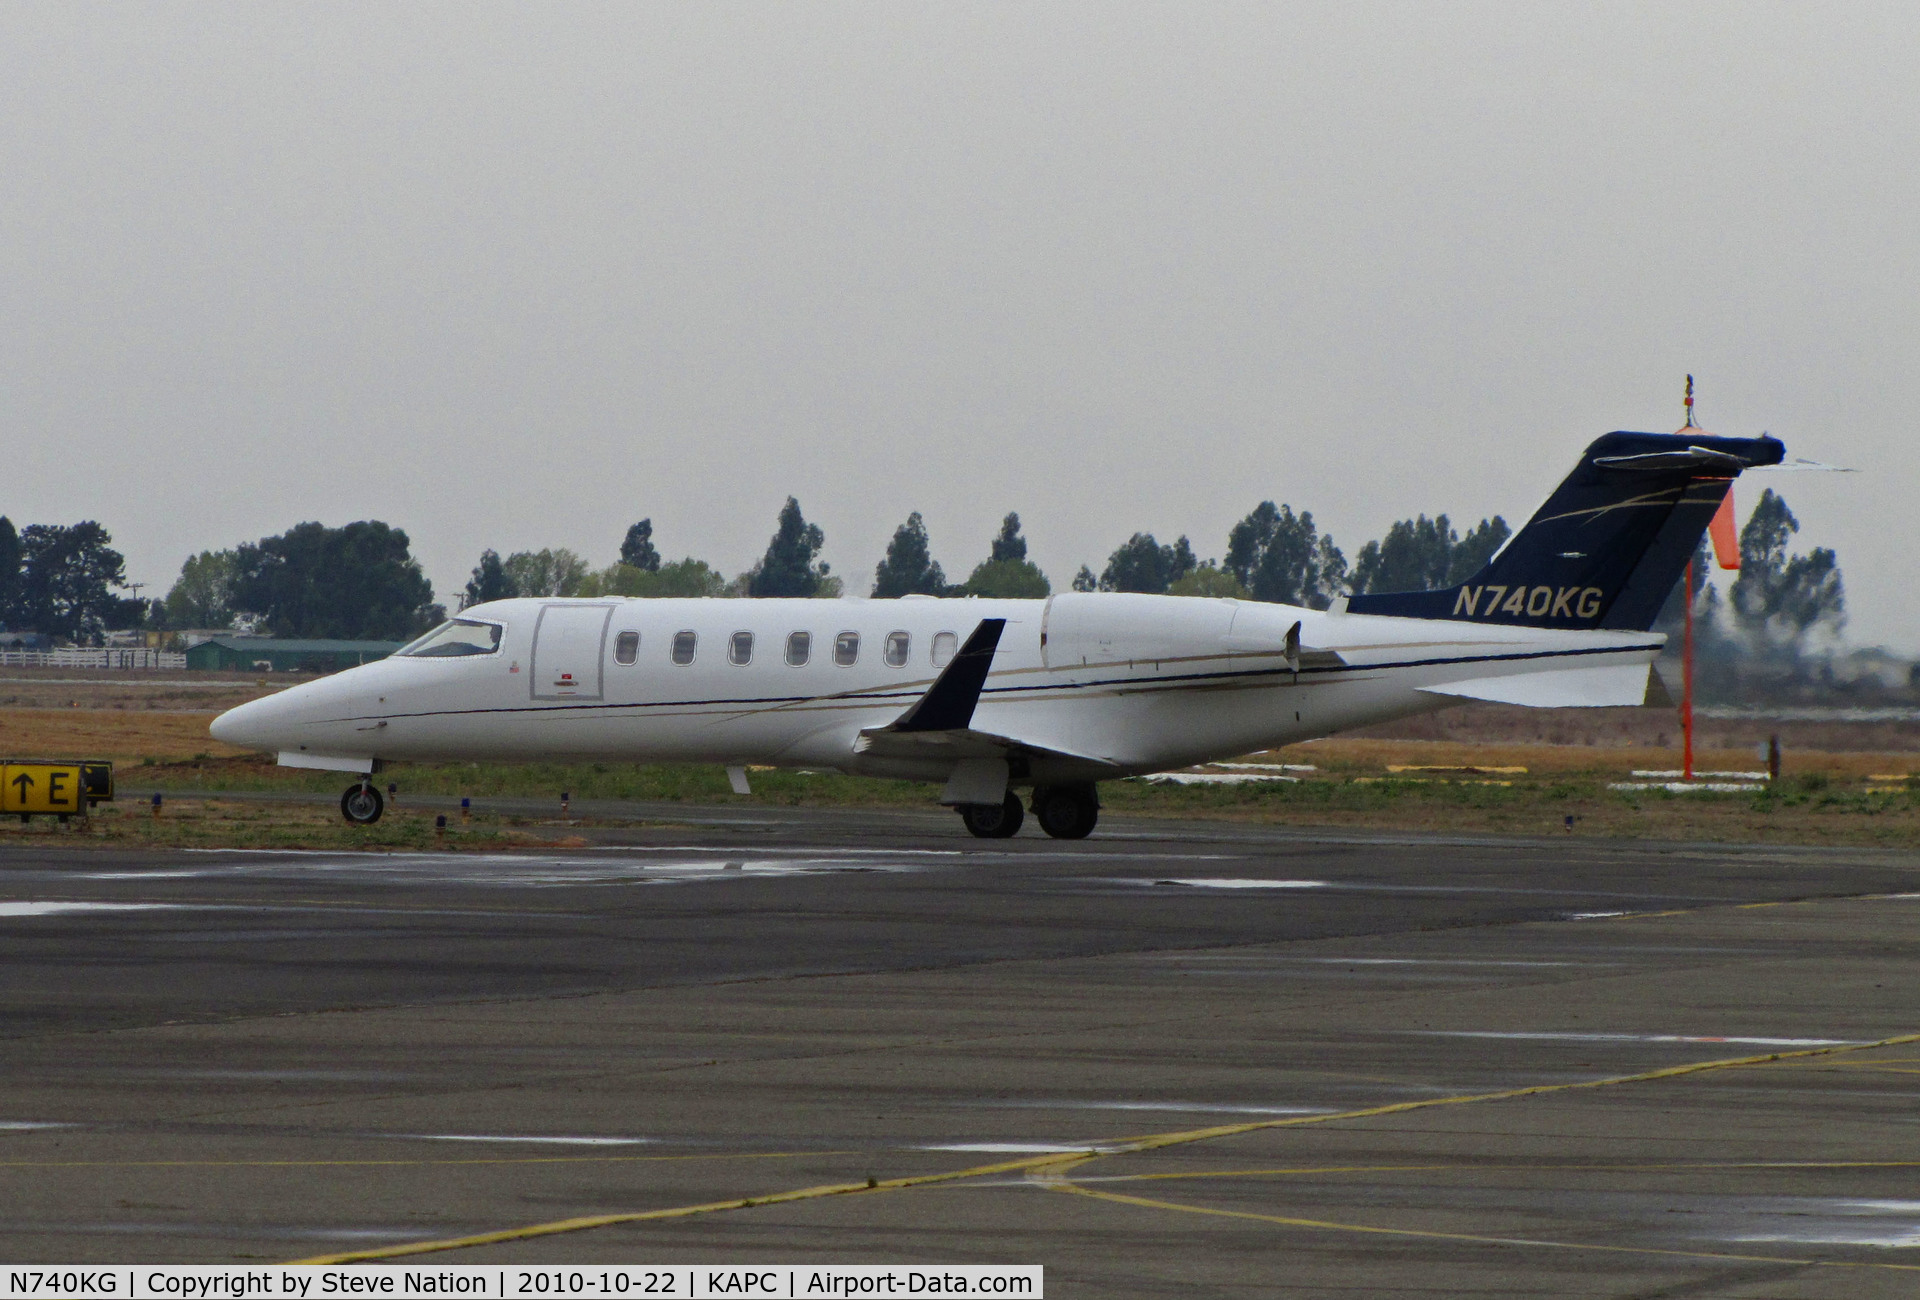 N740KG, 2006 Learjet 45 C/N 2063, DRG Star Management Services 2006 Learjet 2006 taxis for take-off to KRDM (Robertts Field/Redmond, OR) as 